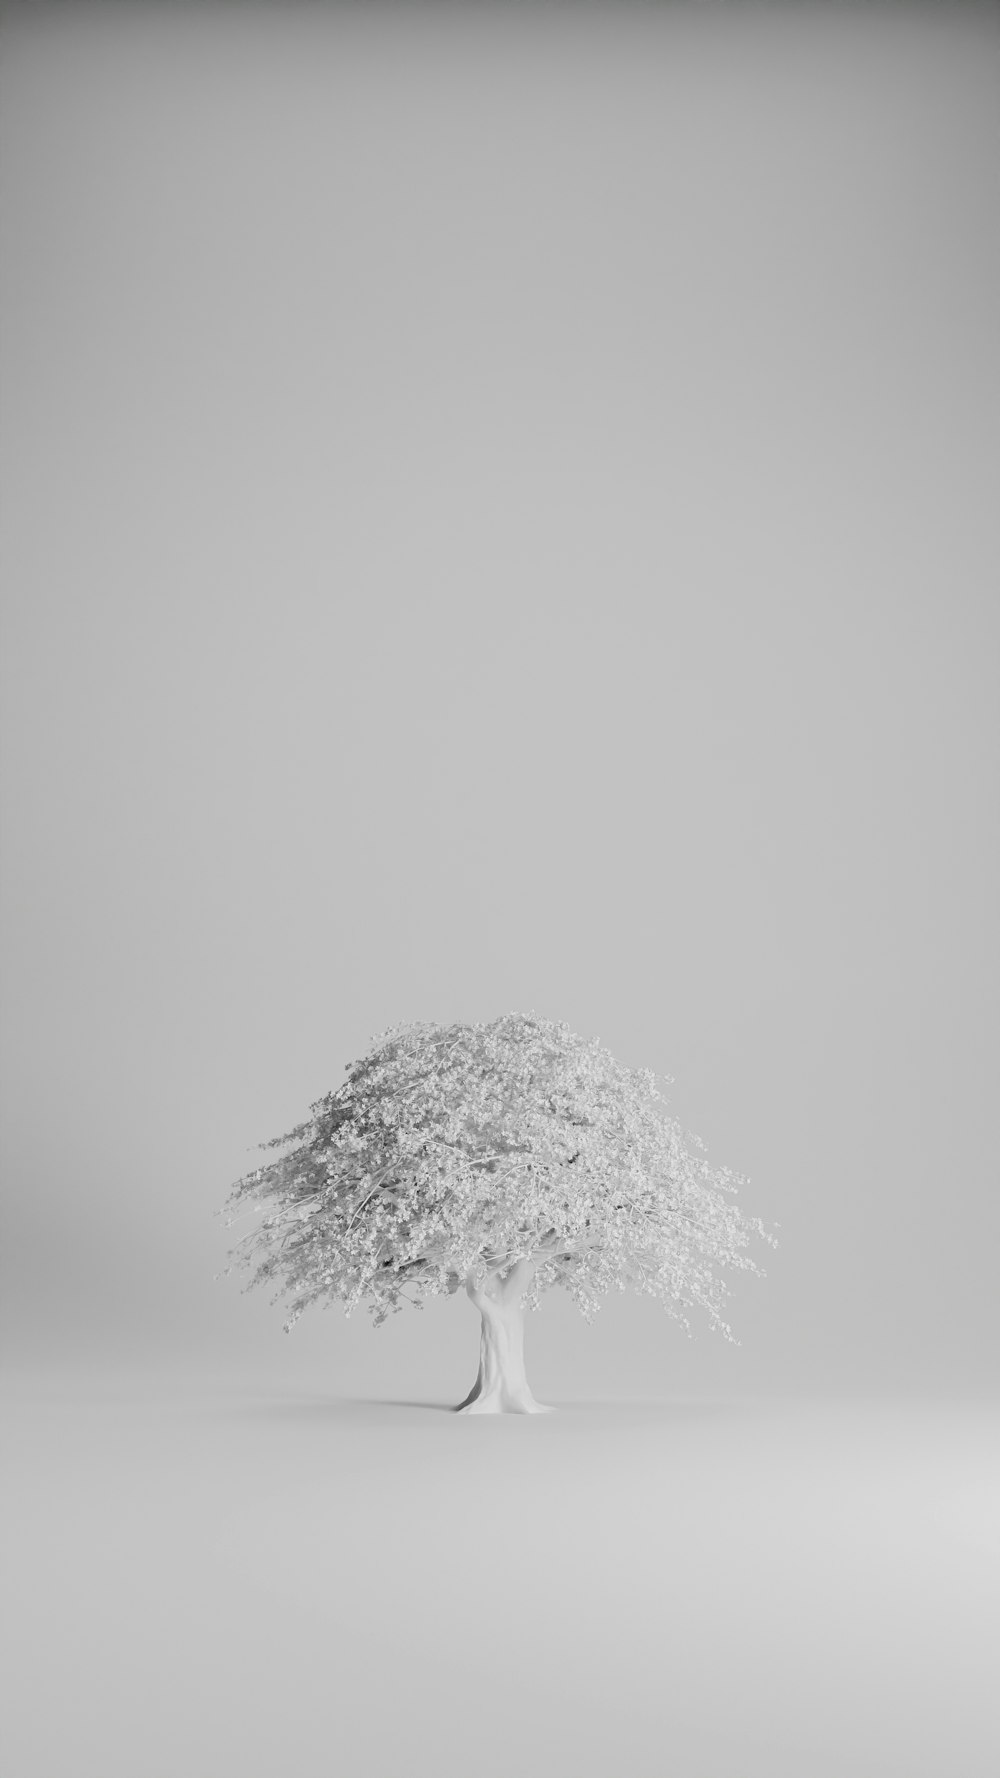 a small tree with a stem